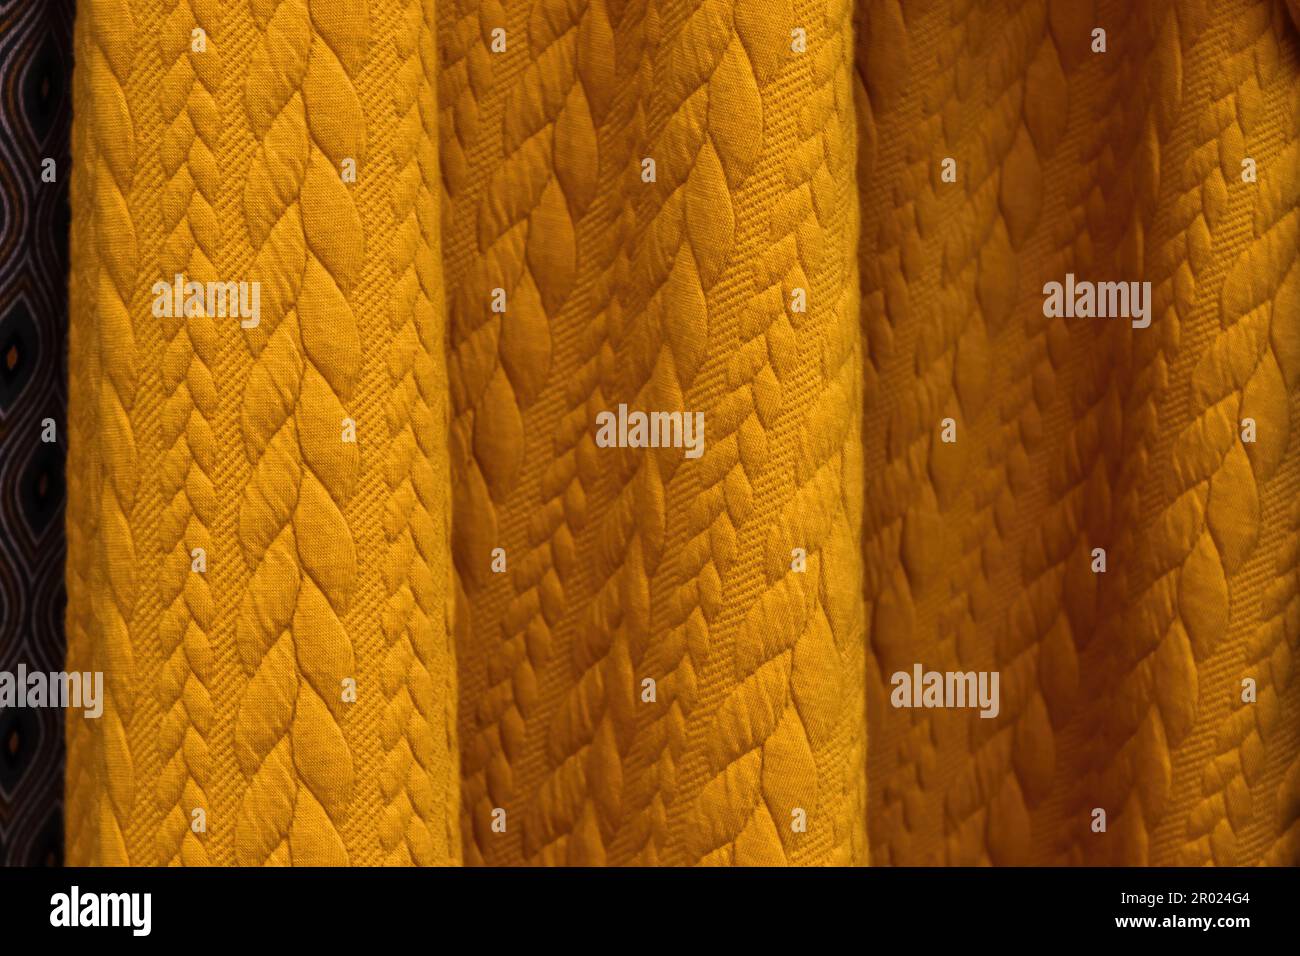 Detailed close up view on samples of cloth and fabrics in different colors found at a fabrics market. Stock Photo